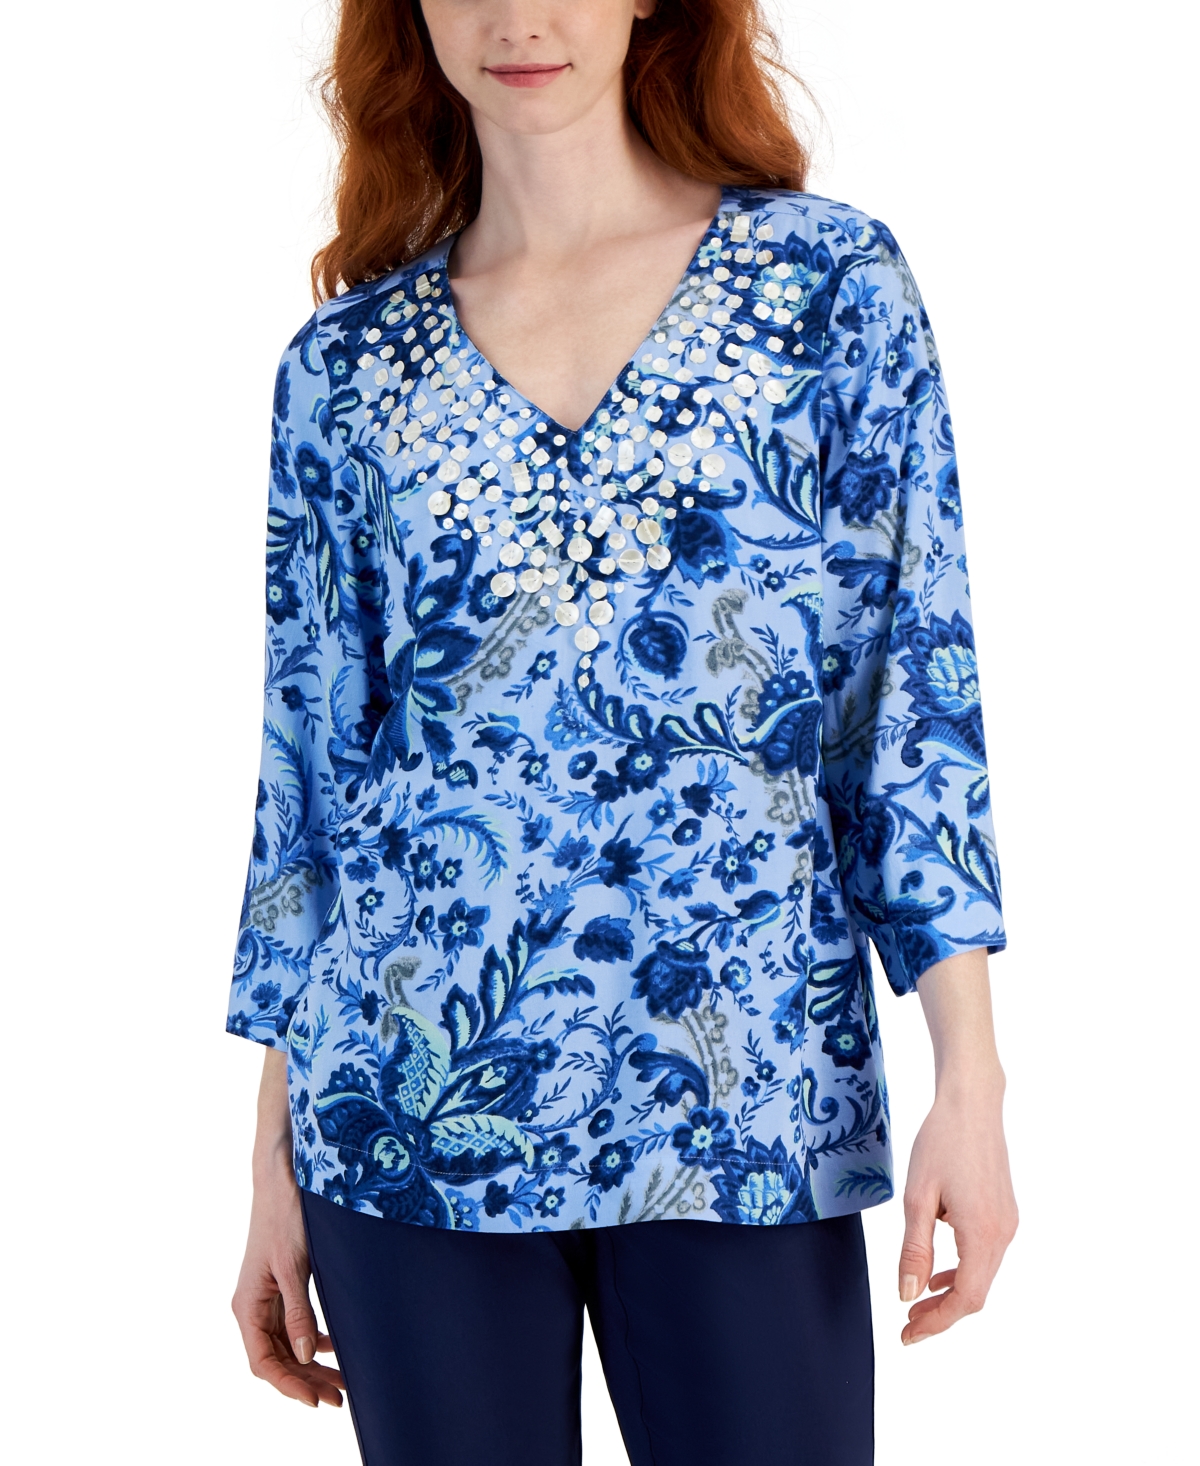 Women's Printed 3/4 Sleeve V-Neck Embellished Top, Created for Macy's - Lilac Sky Combo